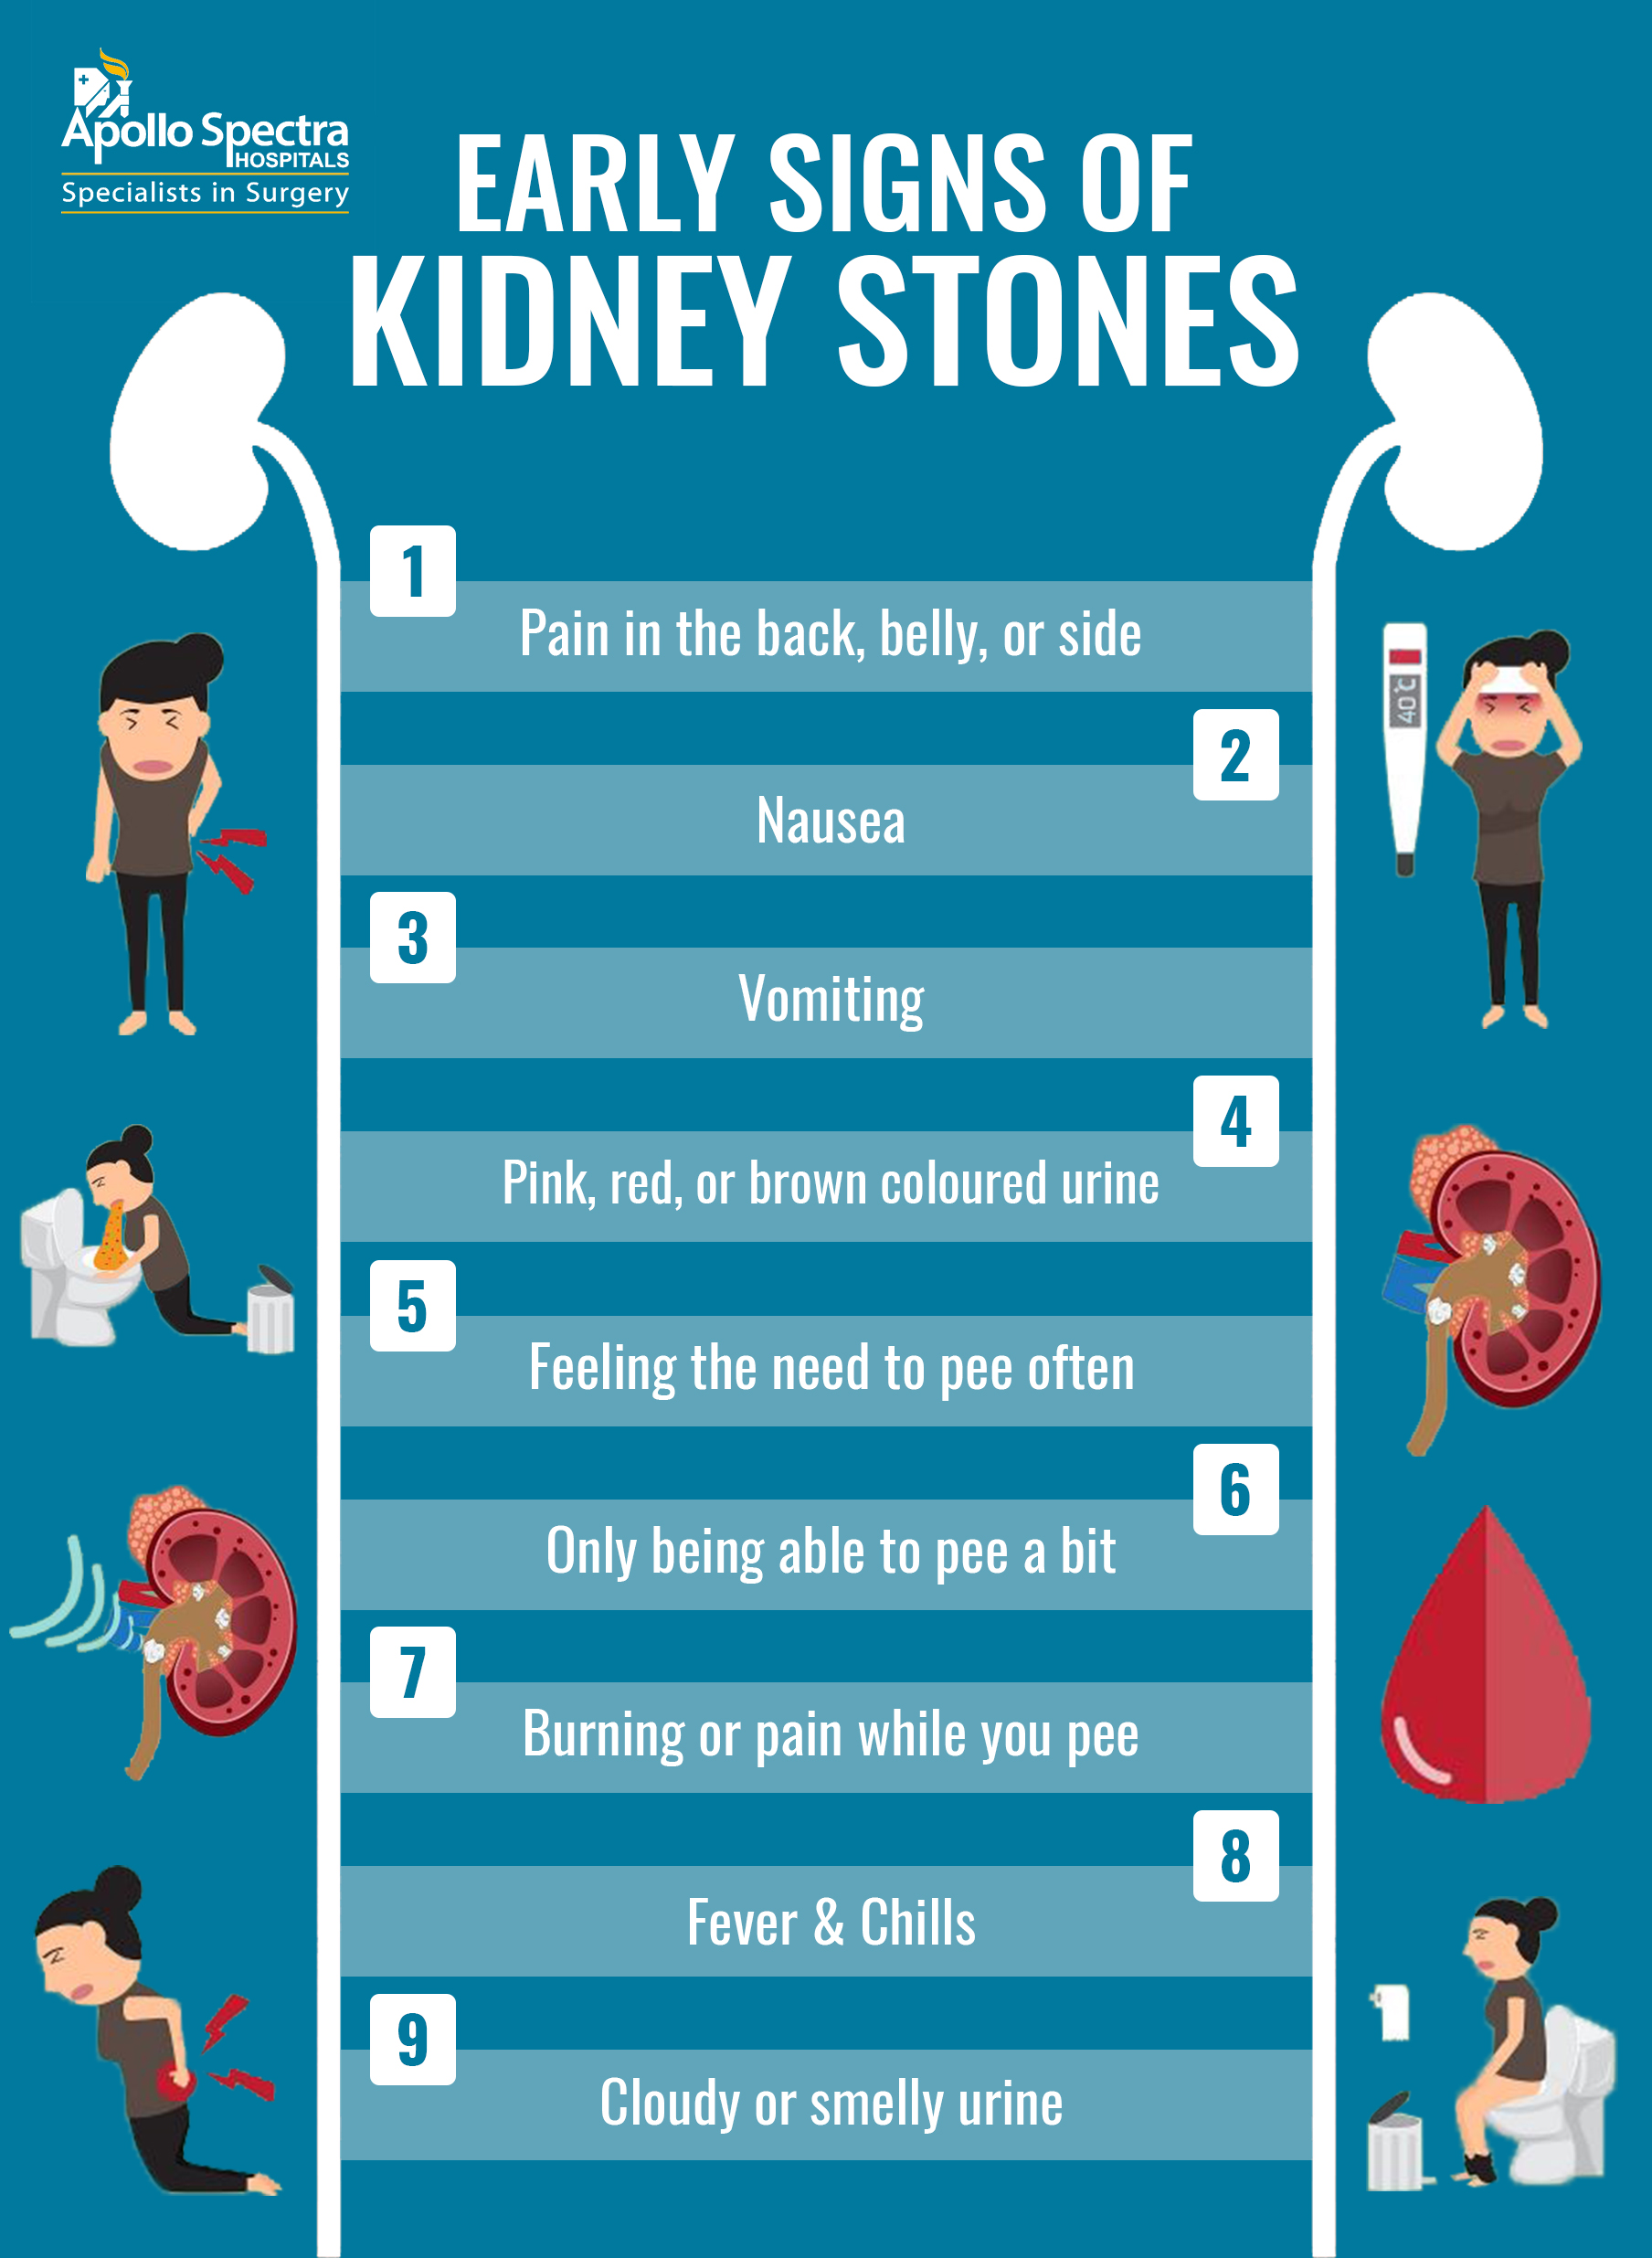 How To Identify The Early Signs Of Kidney Stones